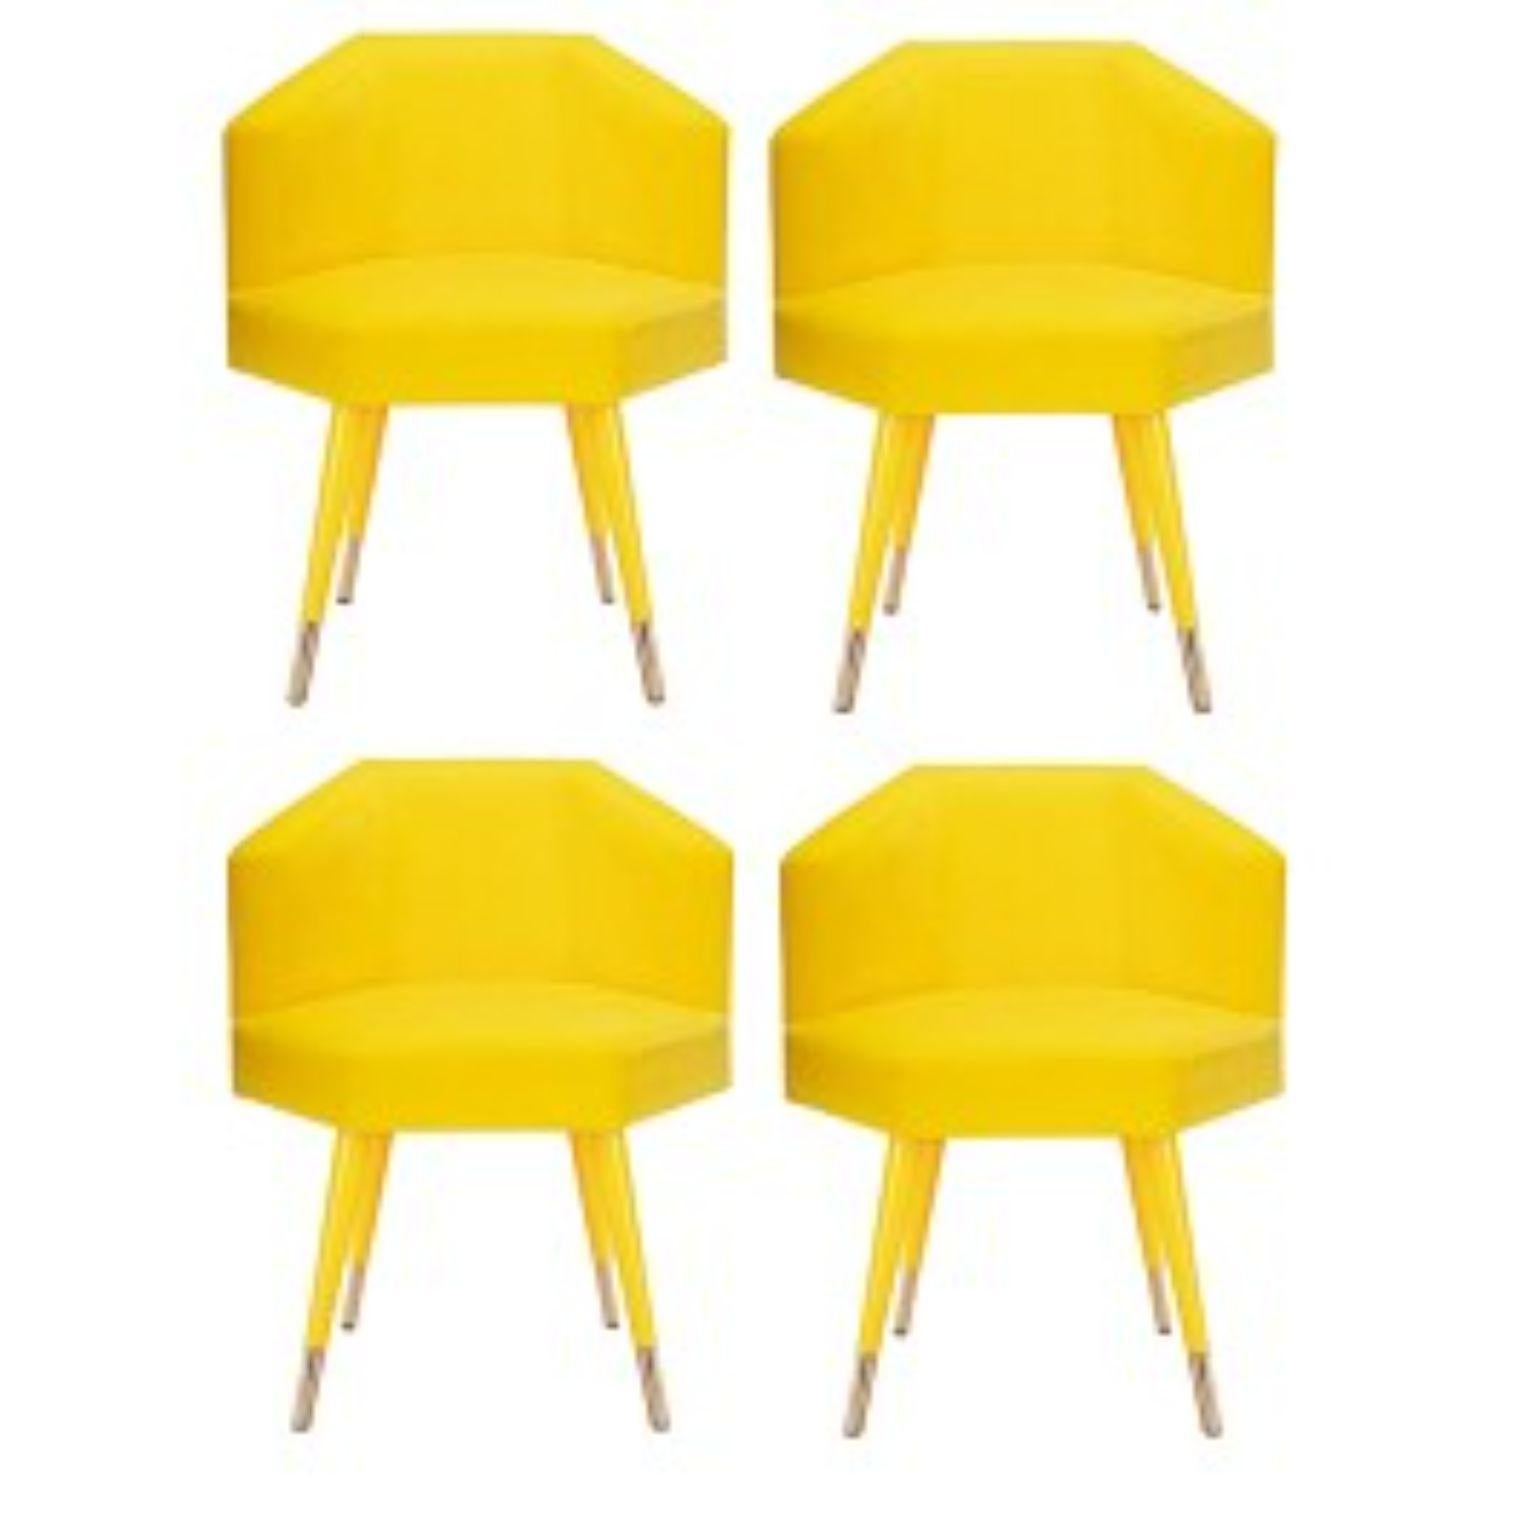 Set of 4 Beelicious dining chairs, Royal Stranger
Dimensions: 63 x 55 x 68 cm
Materials: upholstery lemongrass cotton velvet, lemongrass lacquered wood with glossy finish. feet covers polished brass.


Hexagonal in shape, the Beelicious chair